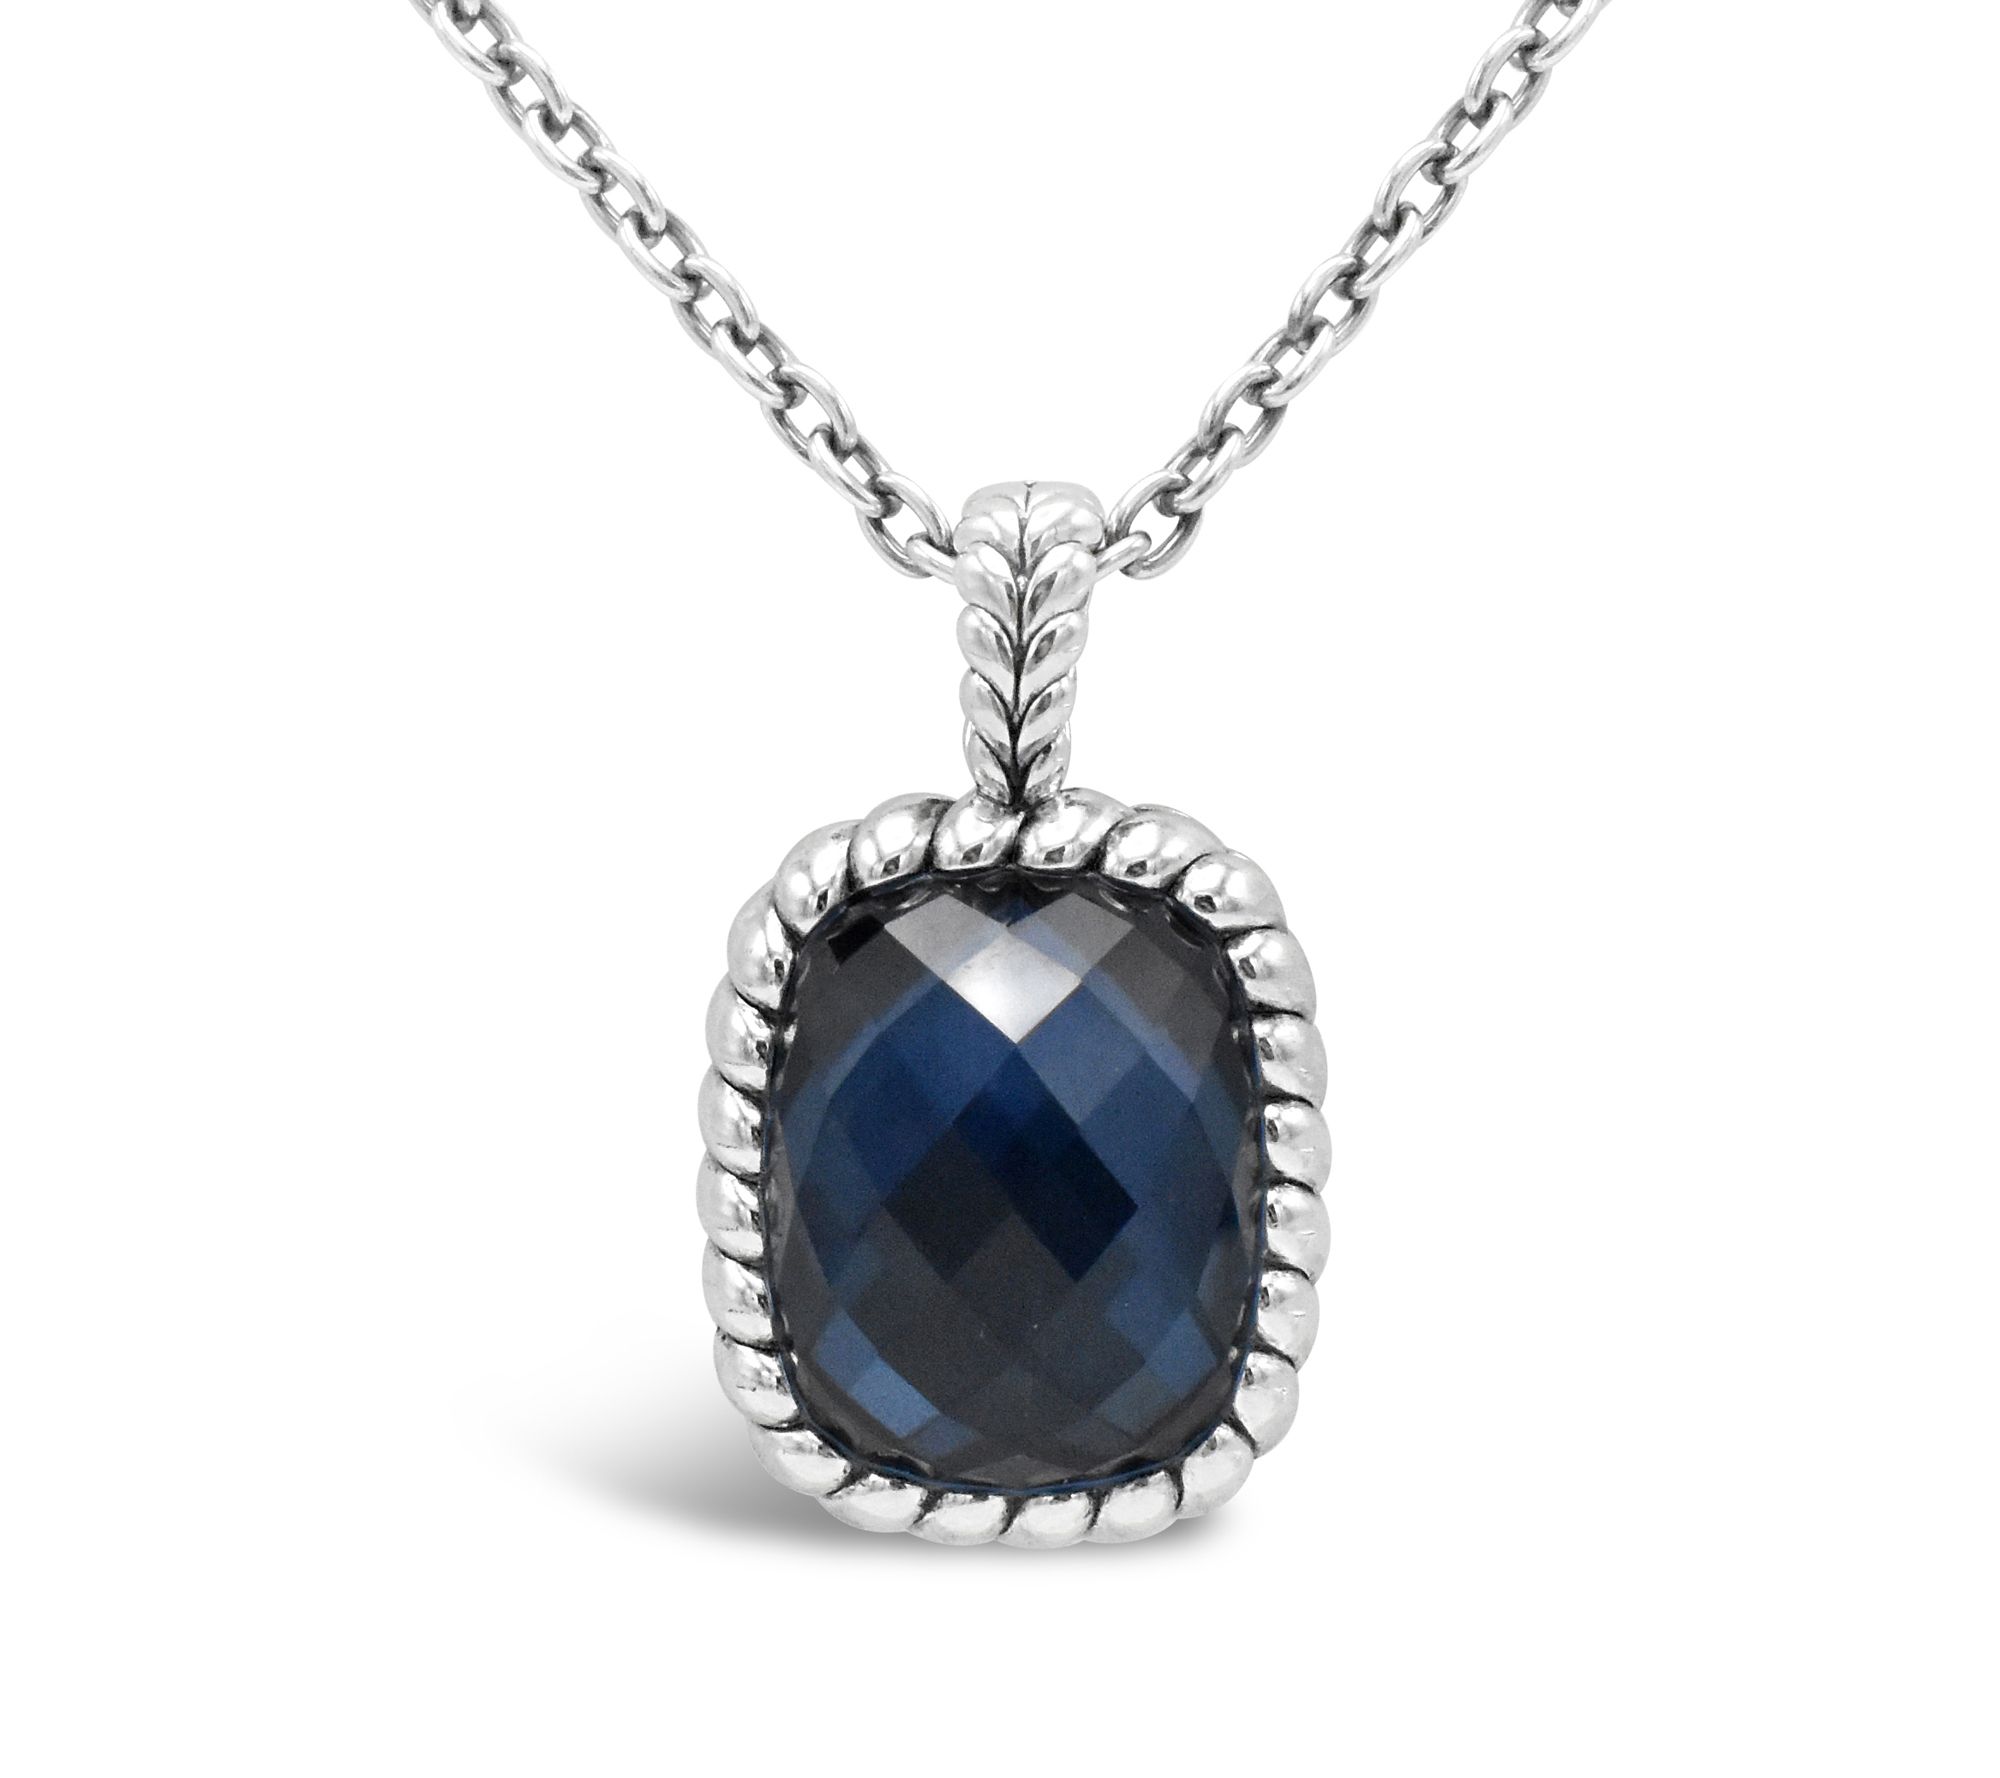 Tiffany Kay Studio Sterling Faceted Gemstone Pendant w/ Chain - QVC.com